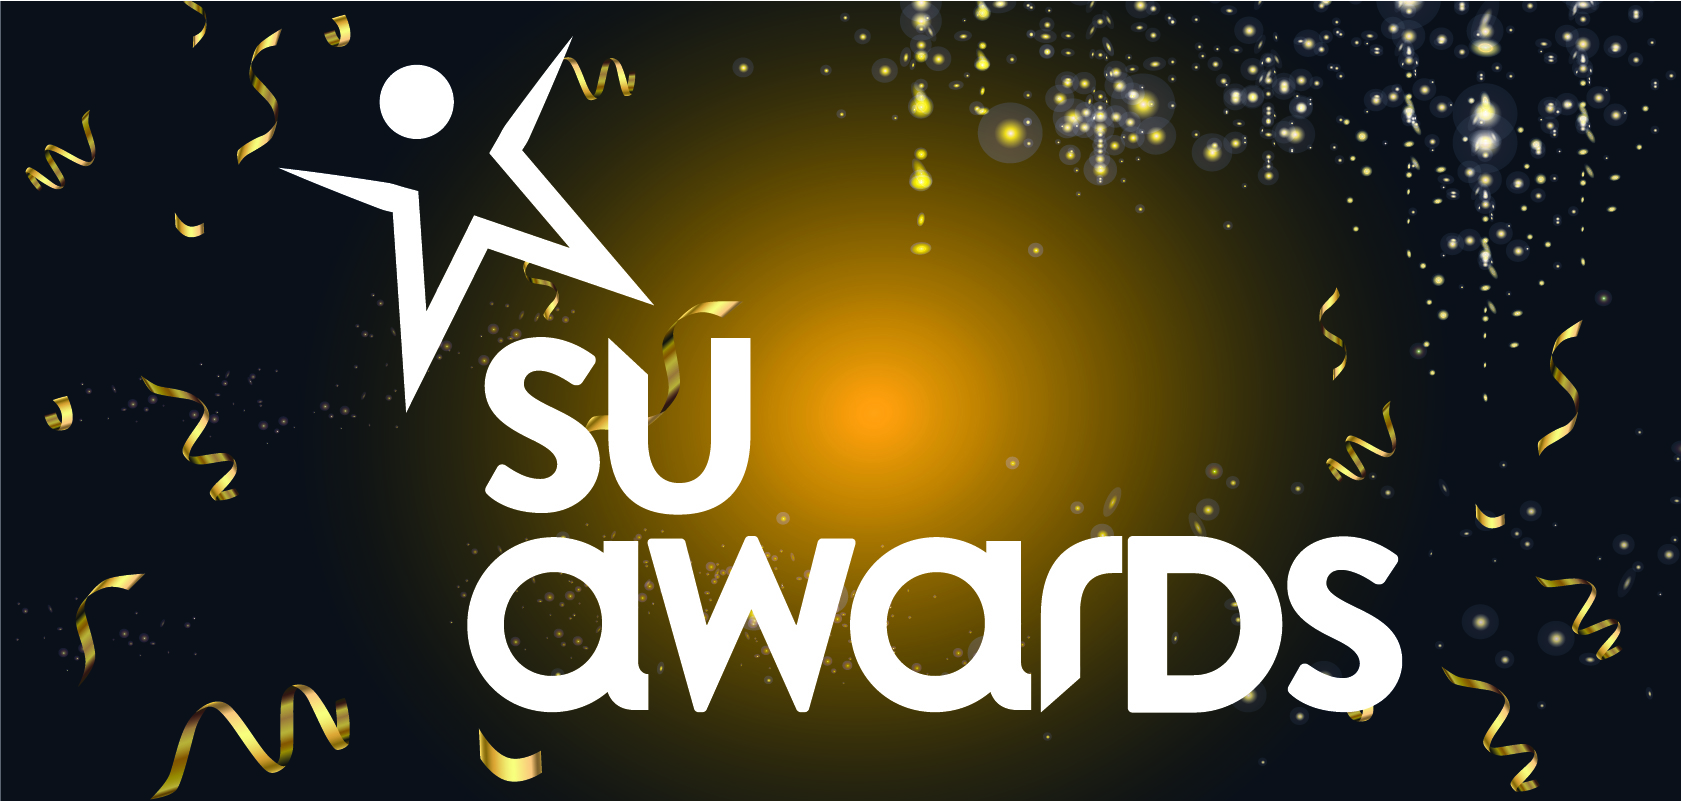 SU Awards written in white font on black and gold background